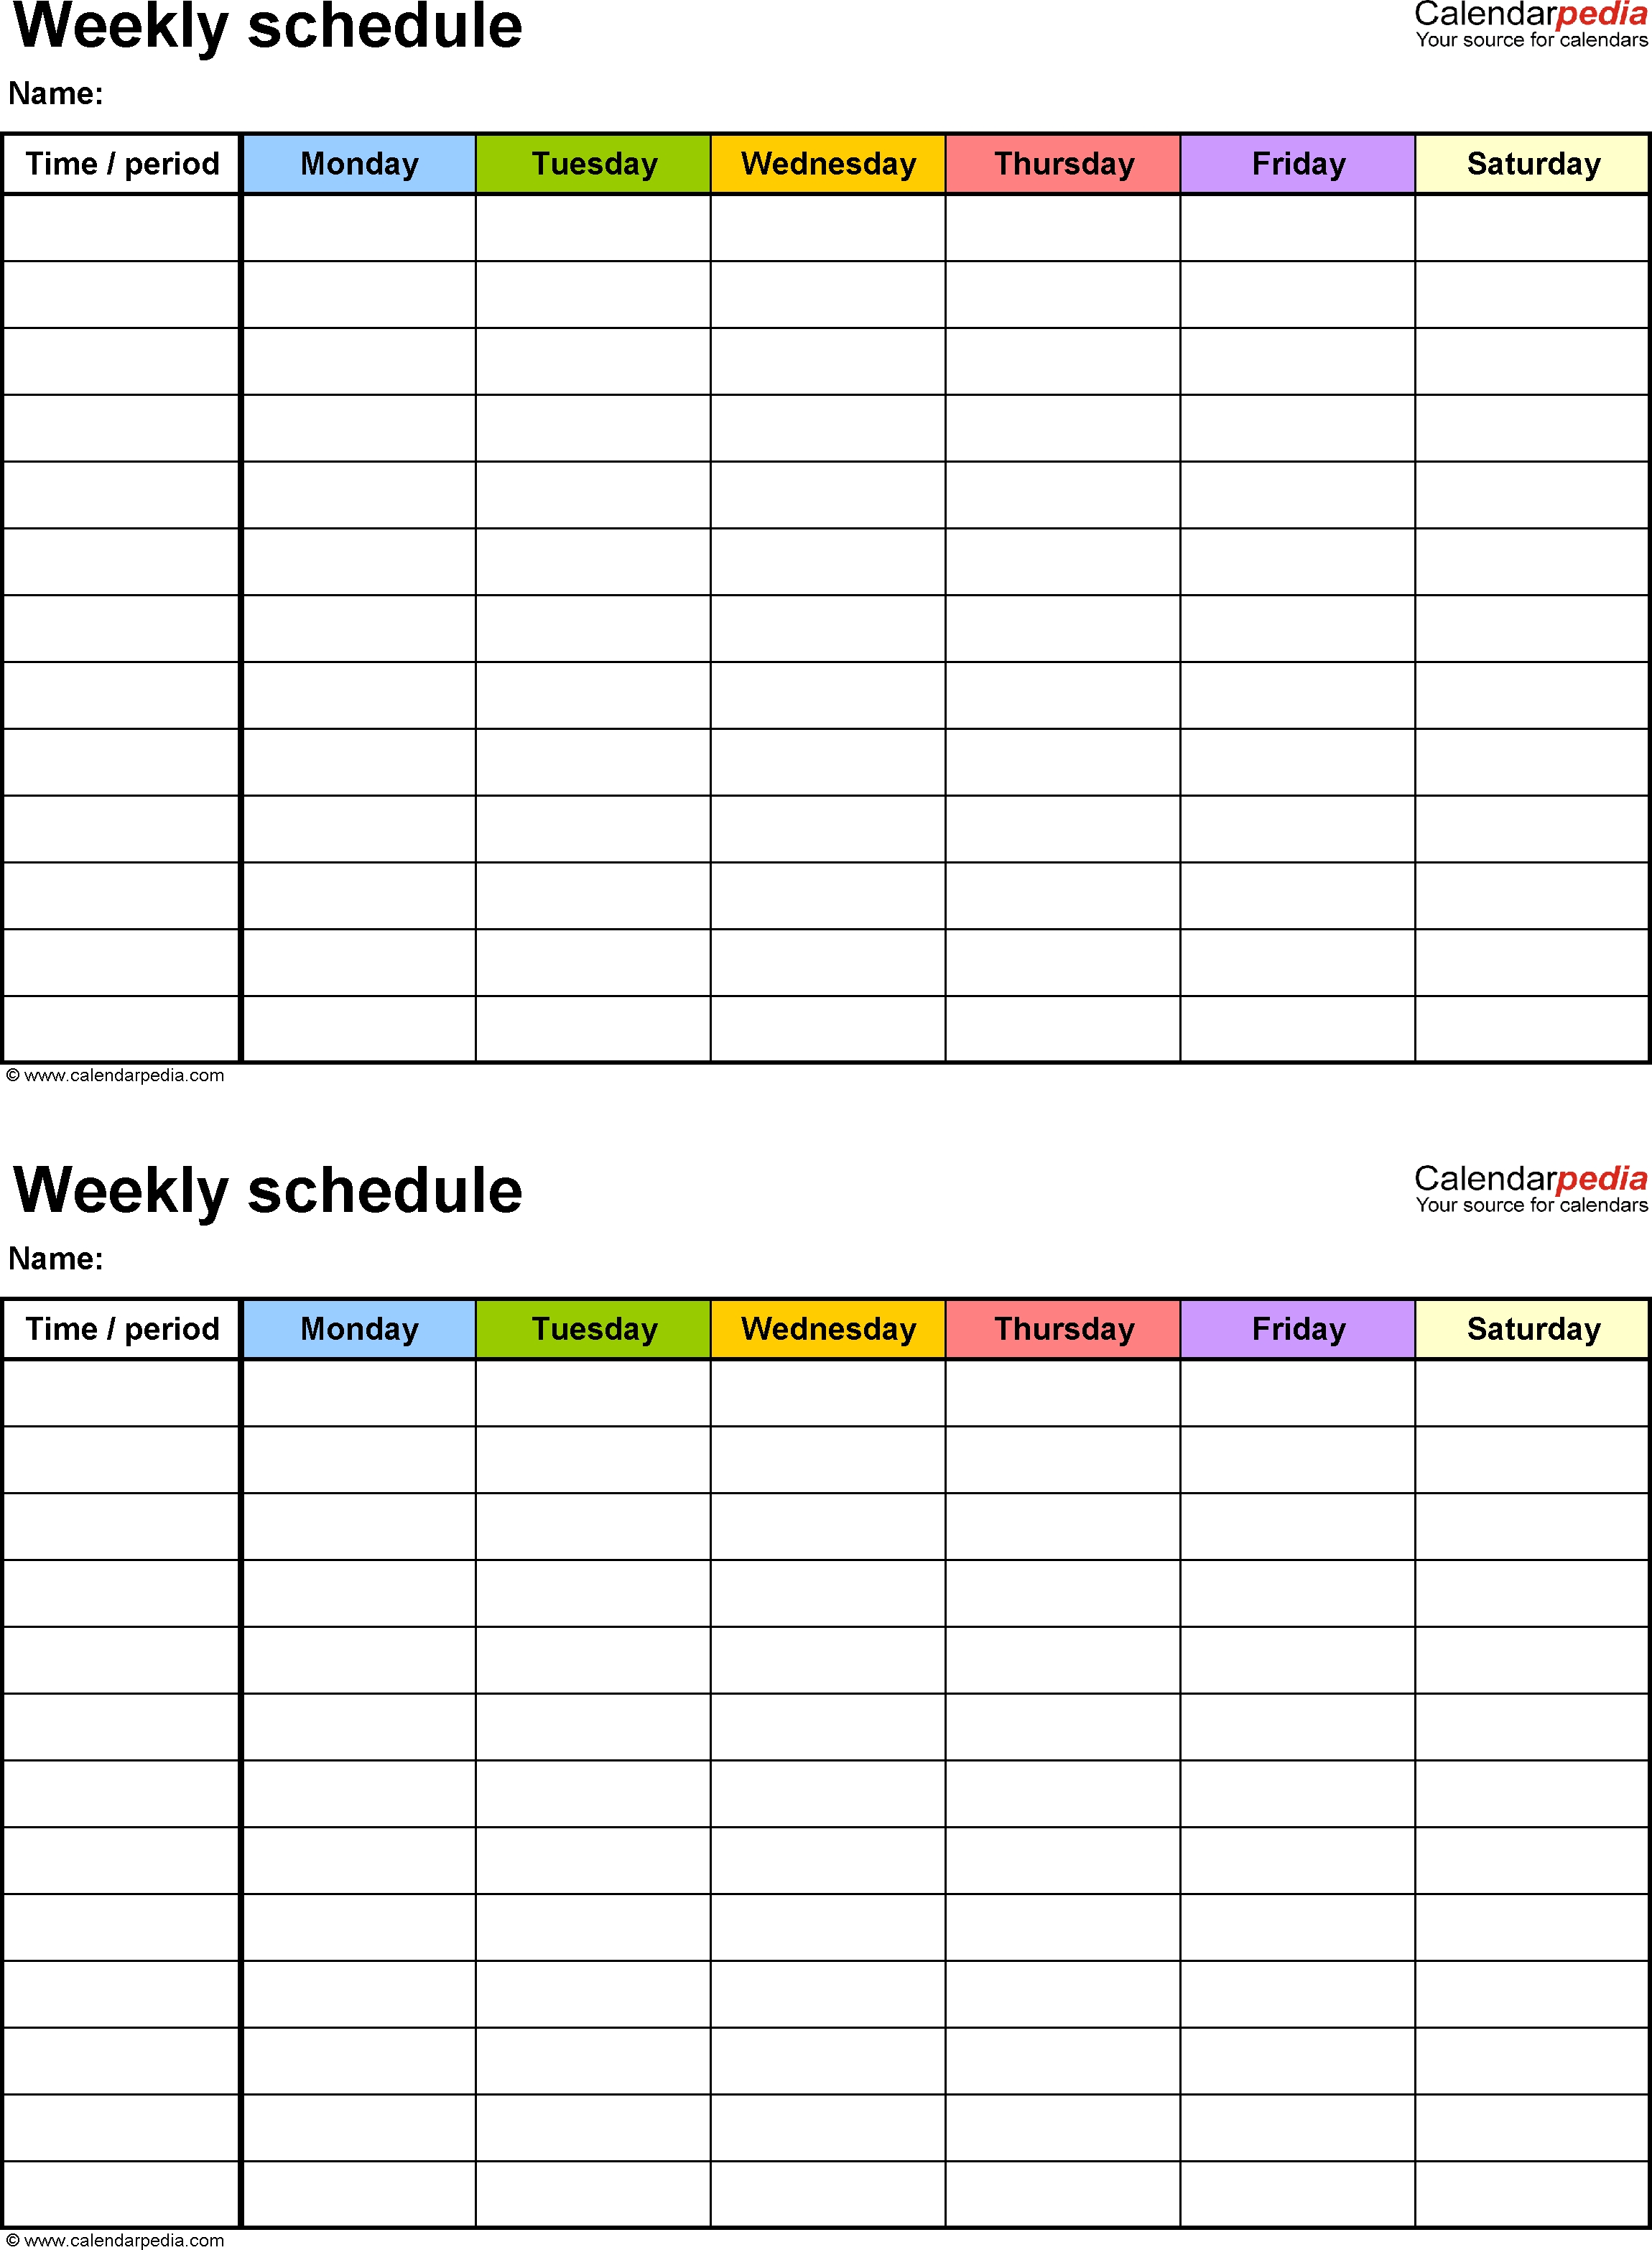 Free Weekly Schedule Templates For Pdf - 18 Templates throughout 5 Day Weekly Timetable Blank 6 Periods